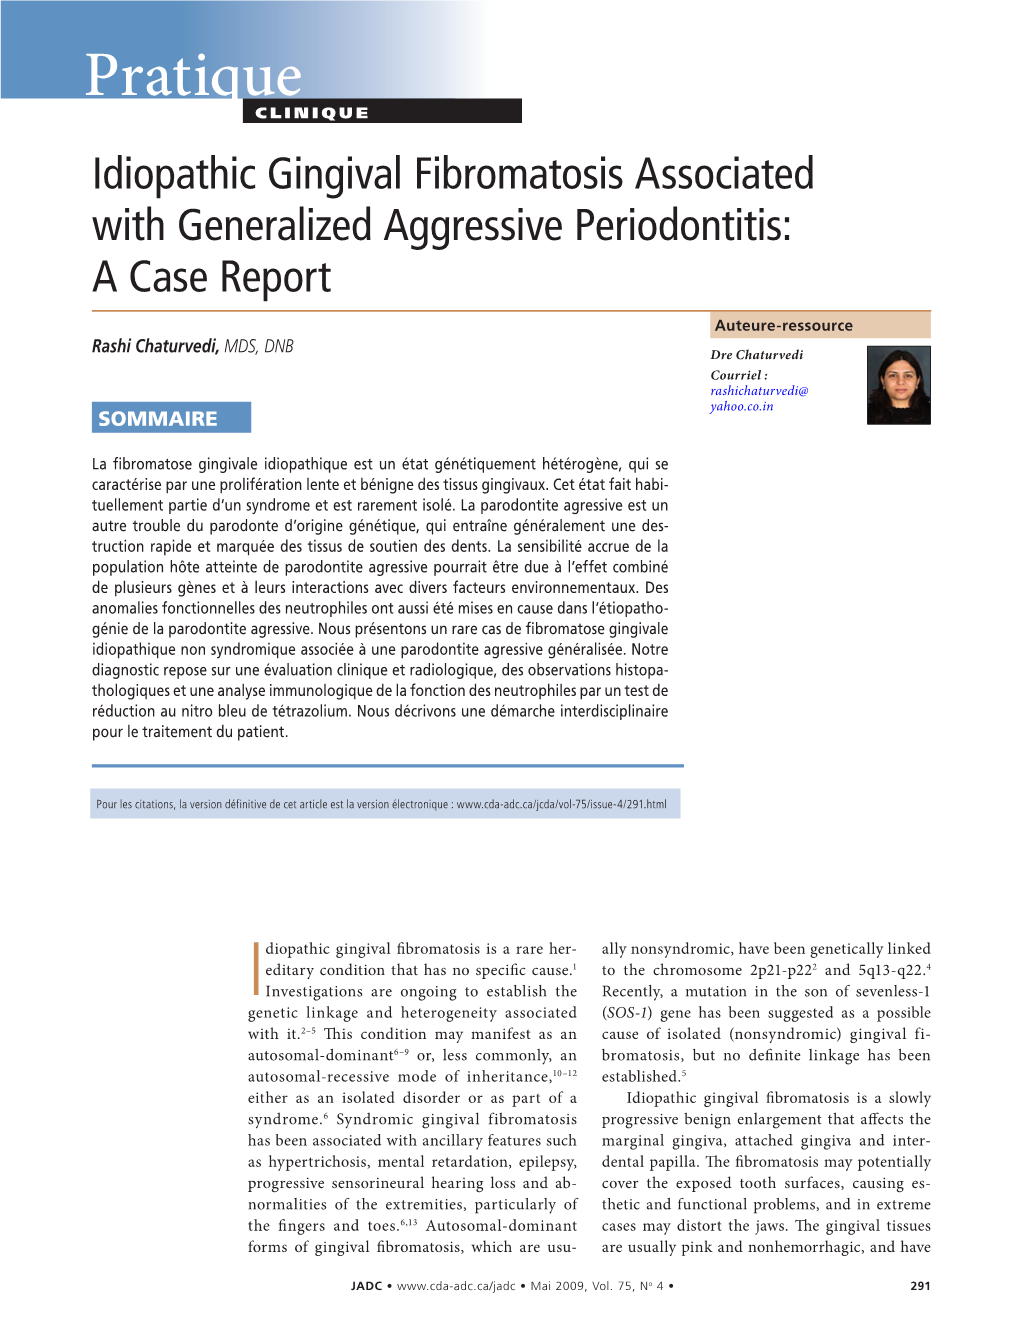 Idiopathic Gingival Fibromatosis Associated with Generalized Aggressive Periodontitis: a Case Report